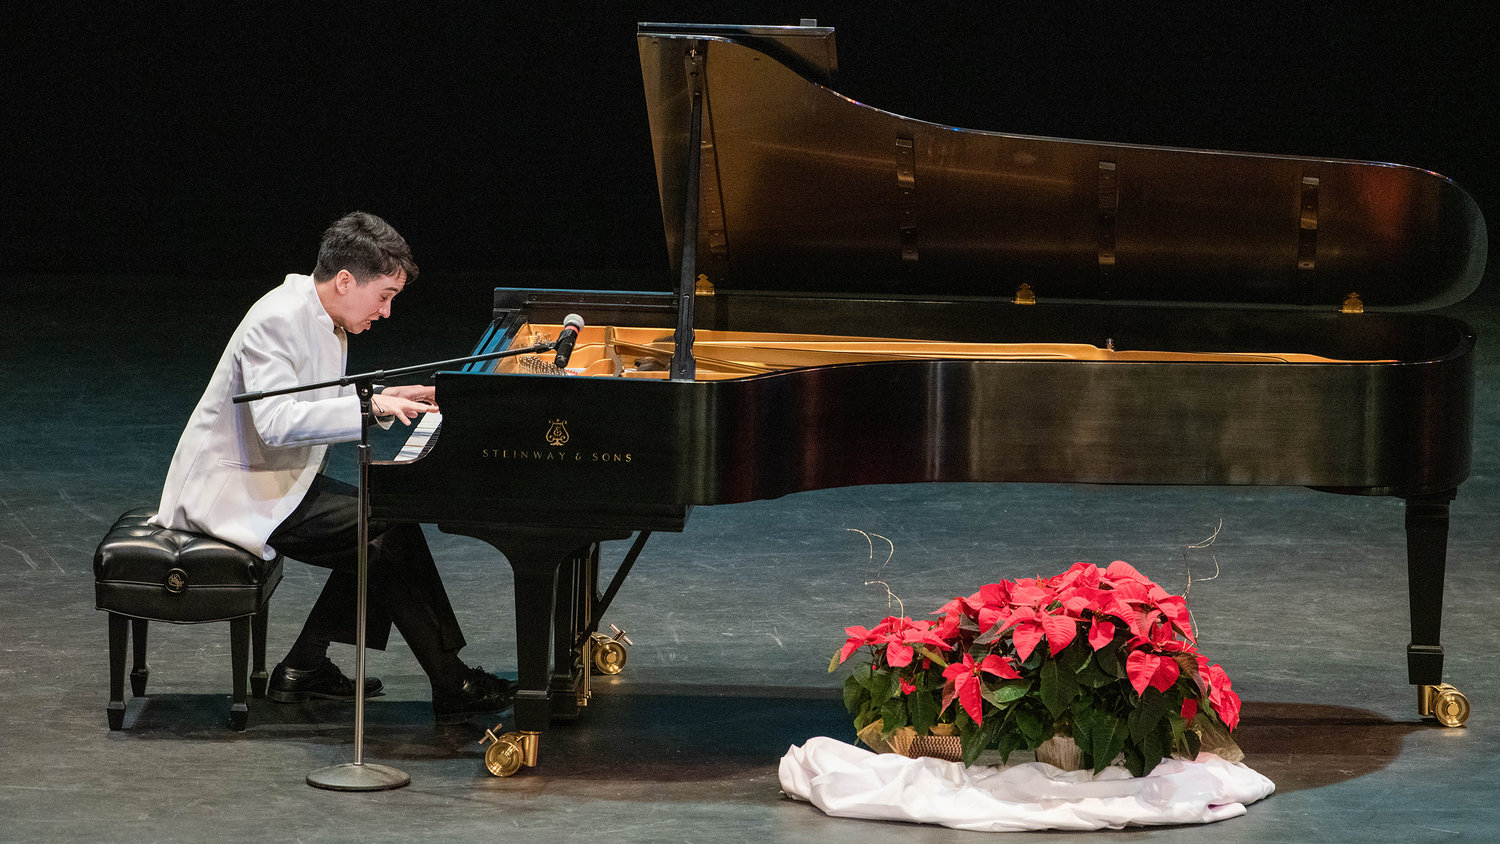 Charlie Albright performs “I’ll Be Home for Christmas,” for an audience on a nine-foot Steinway & Sons grand piano inside the Corbet Theatre Friday evening with proceeds going to the Charlie Albright Scholarship at Centralia College.